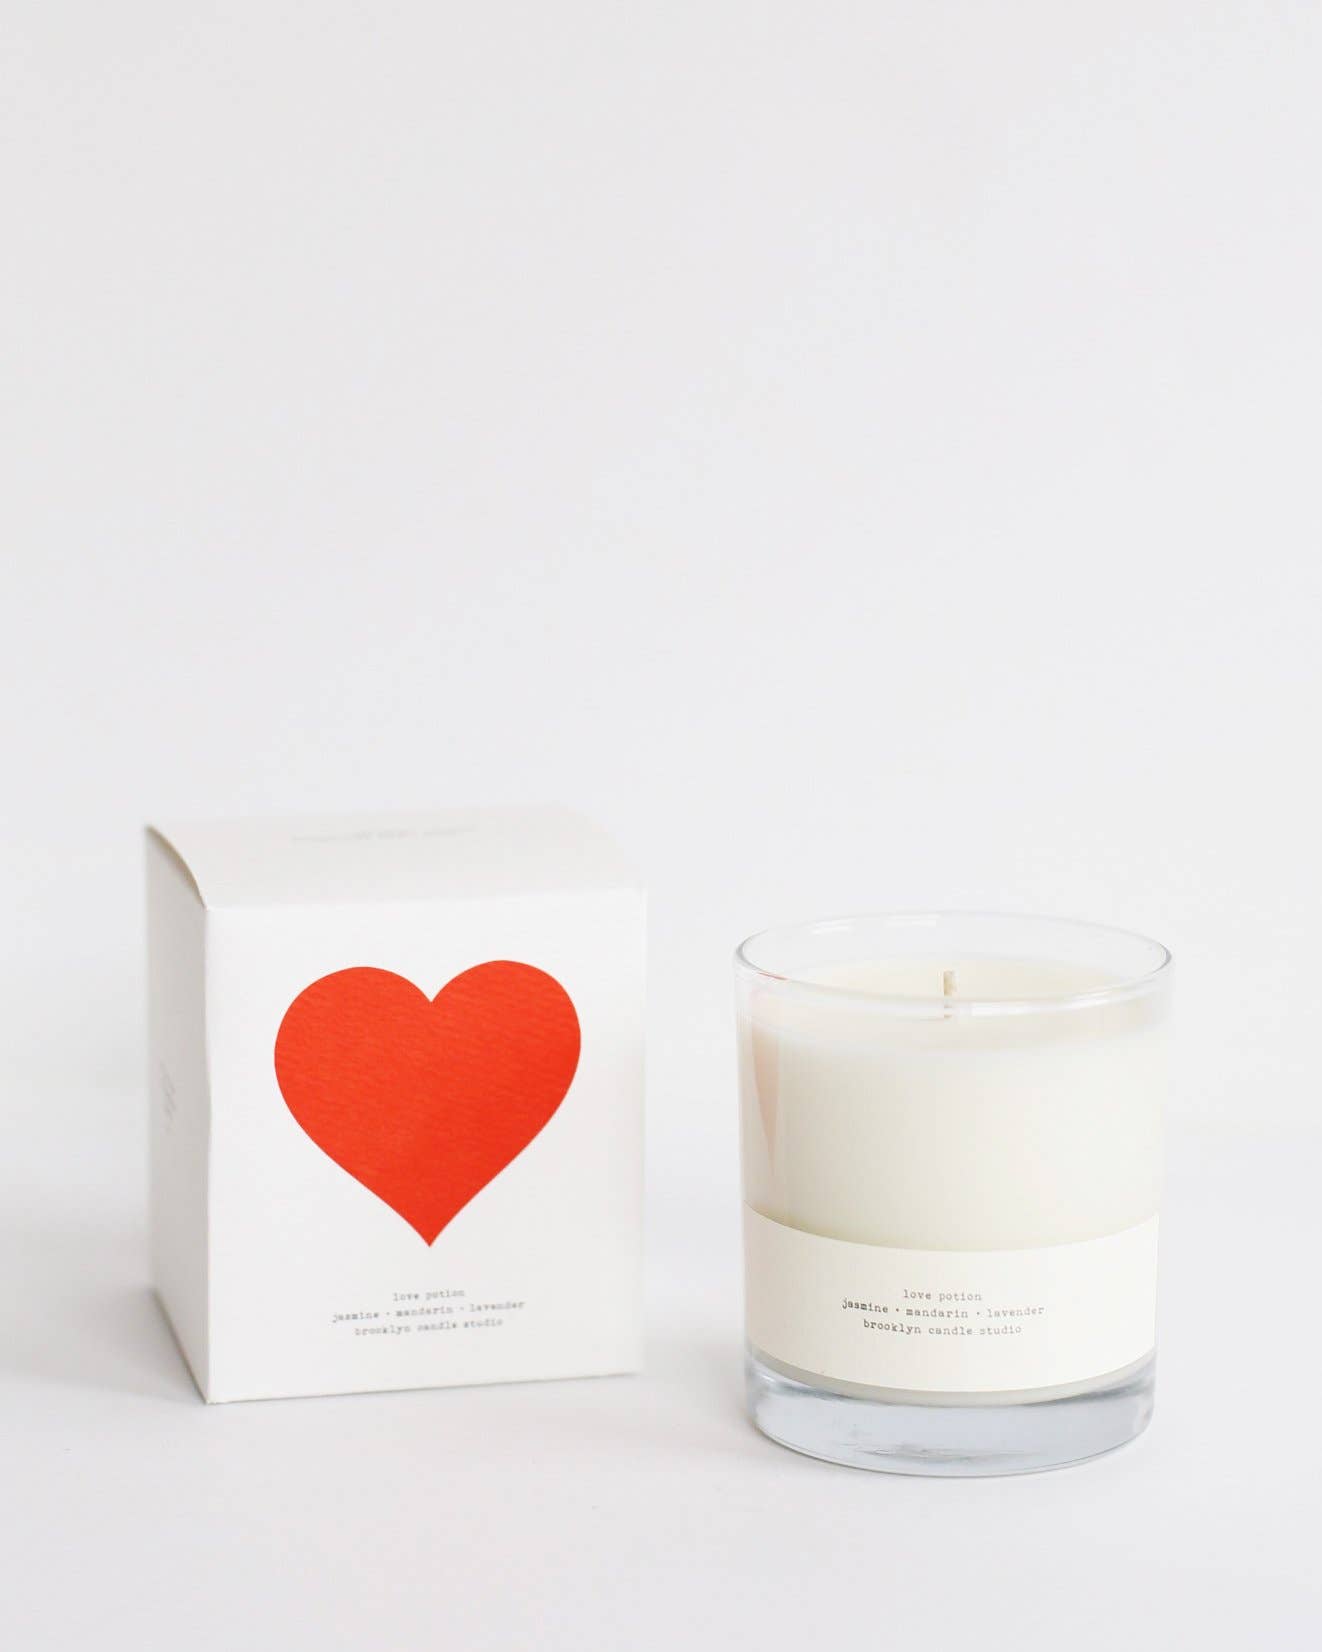 Love Potion Minimalist candle in elegant glass holder with heart box by Brooklyn Candle Studio